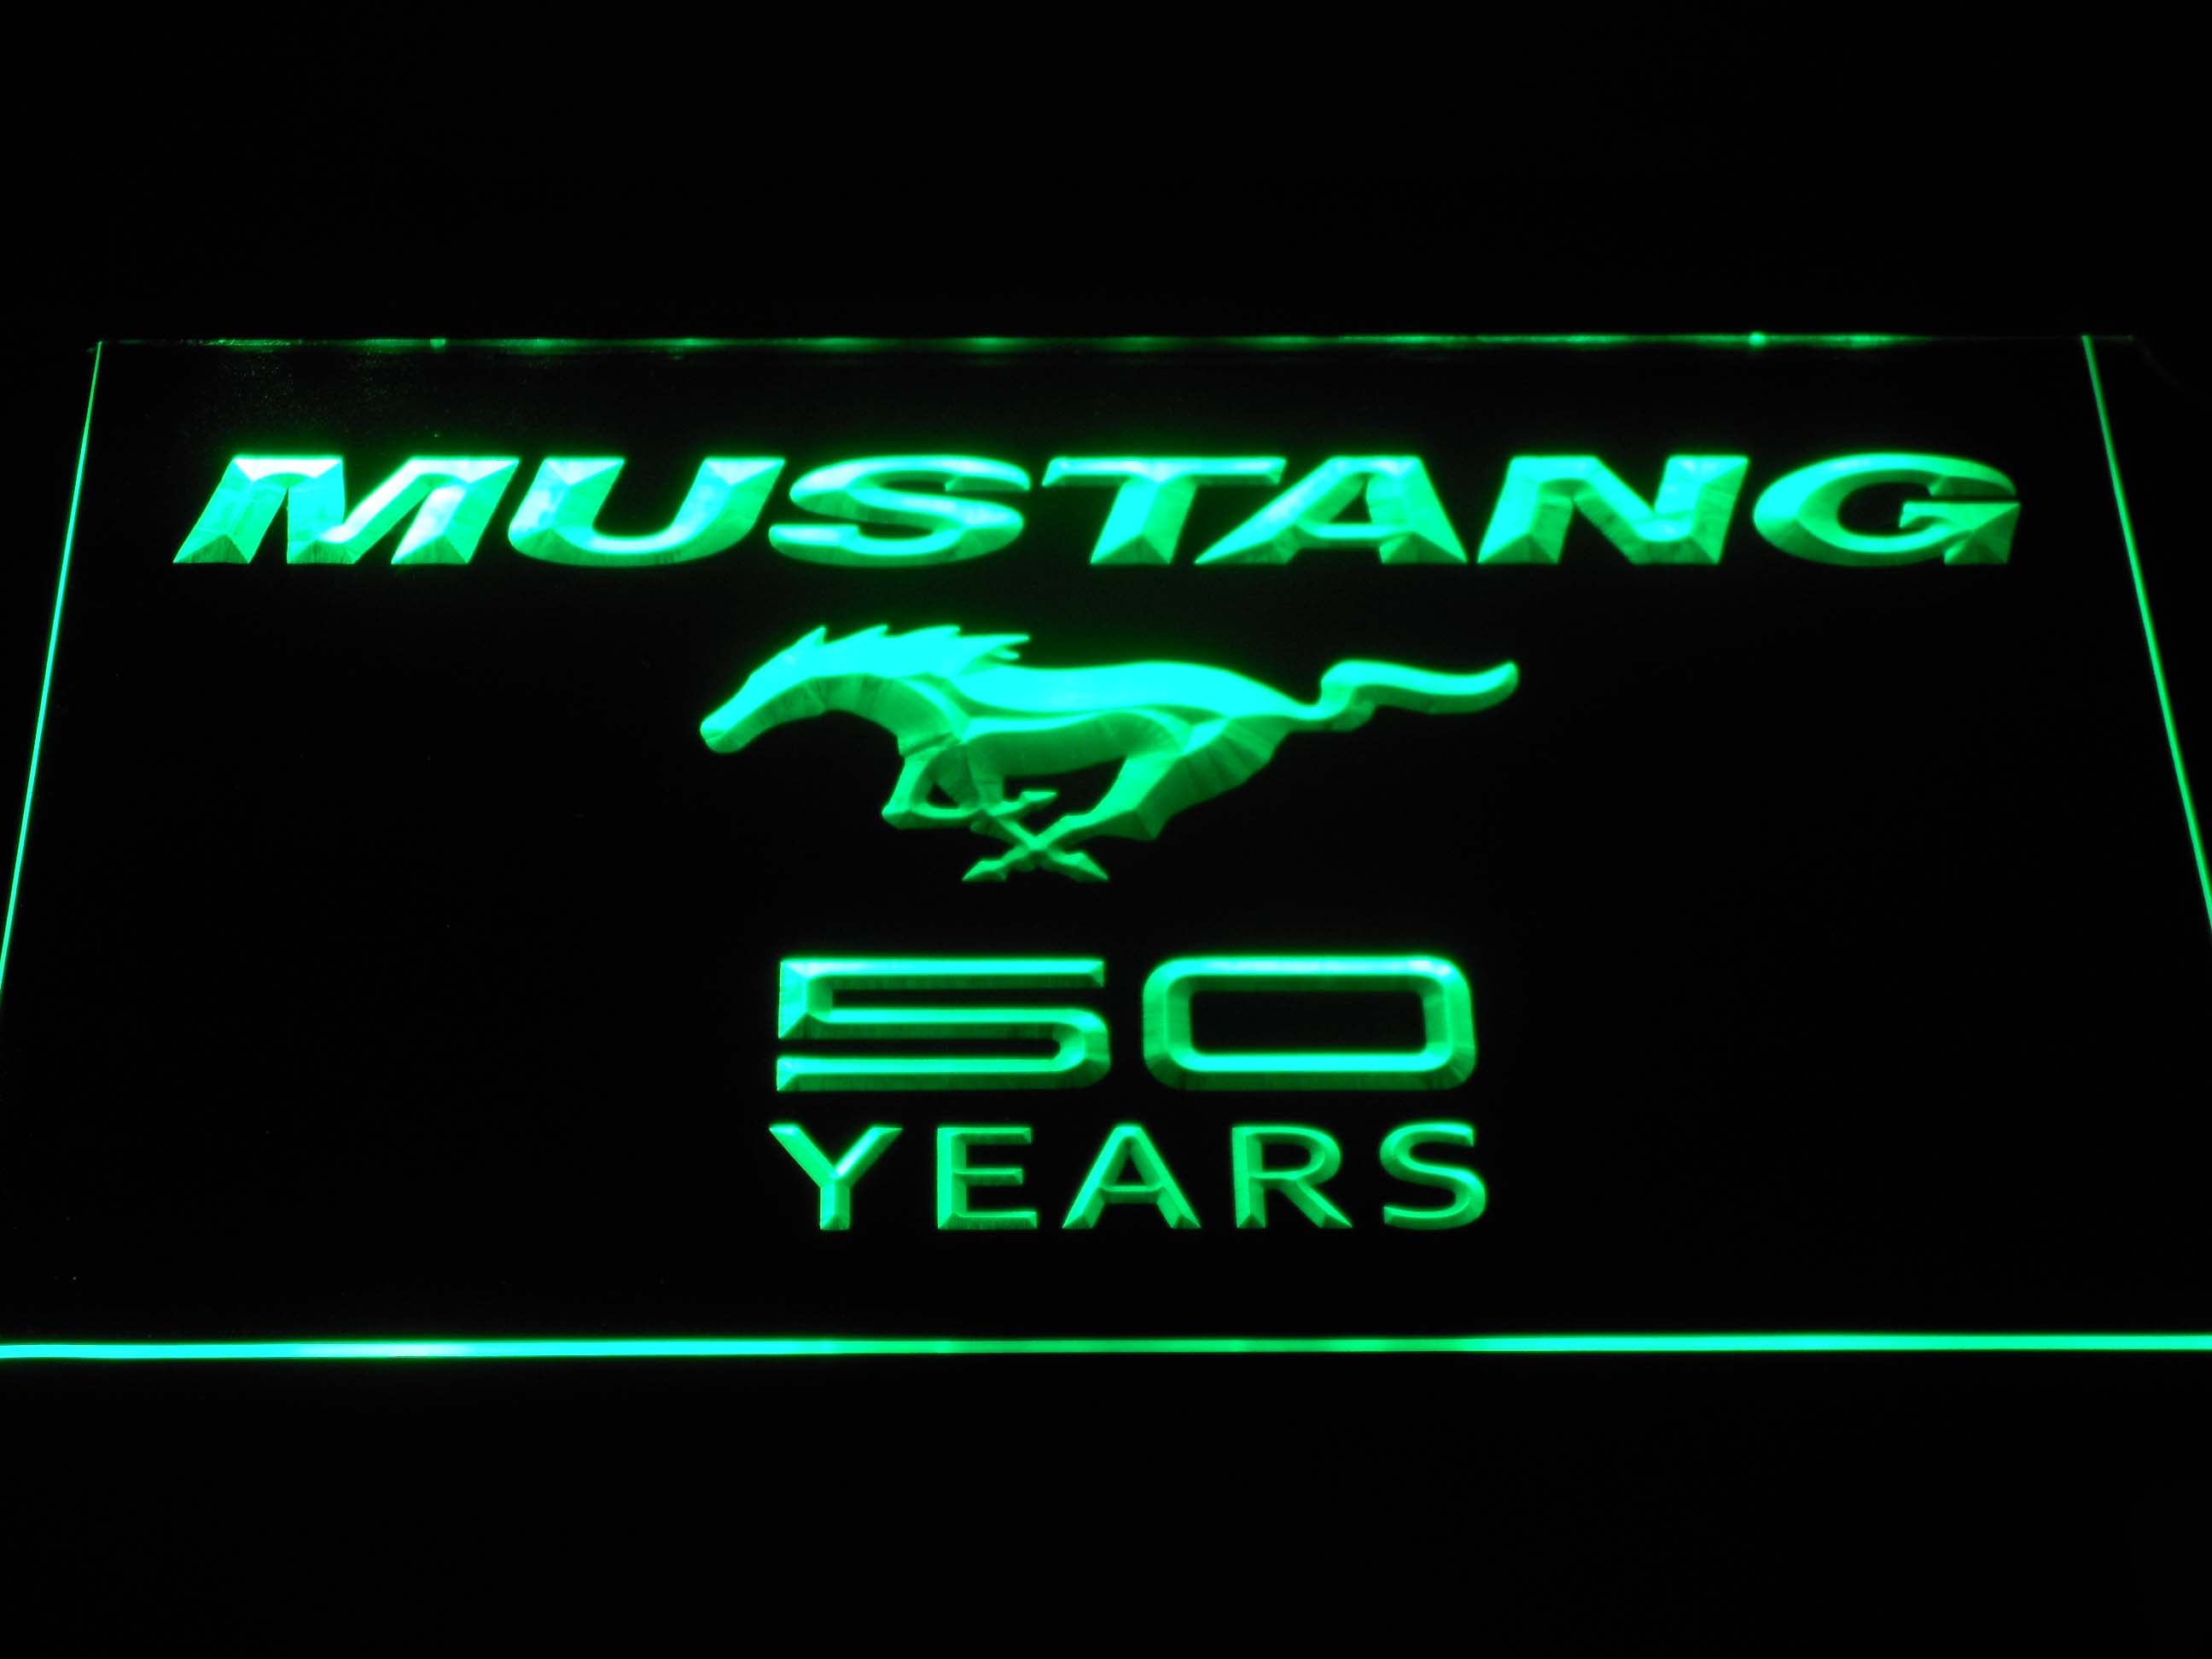 Ford Mustang 50 Years Wordmark Neon Light LED Sign